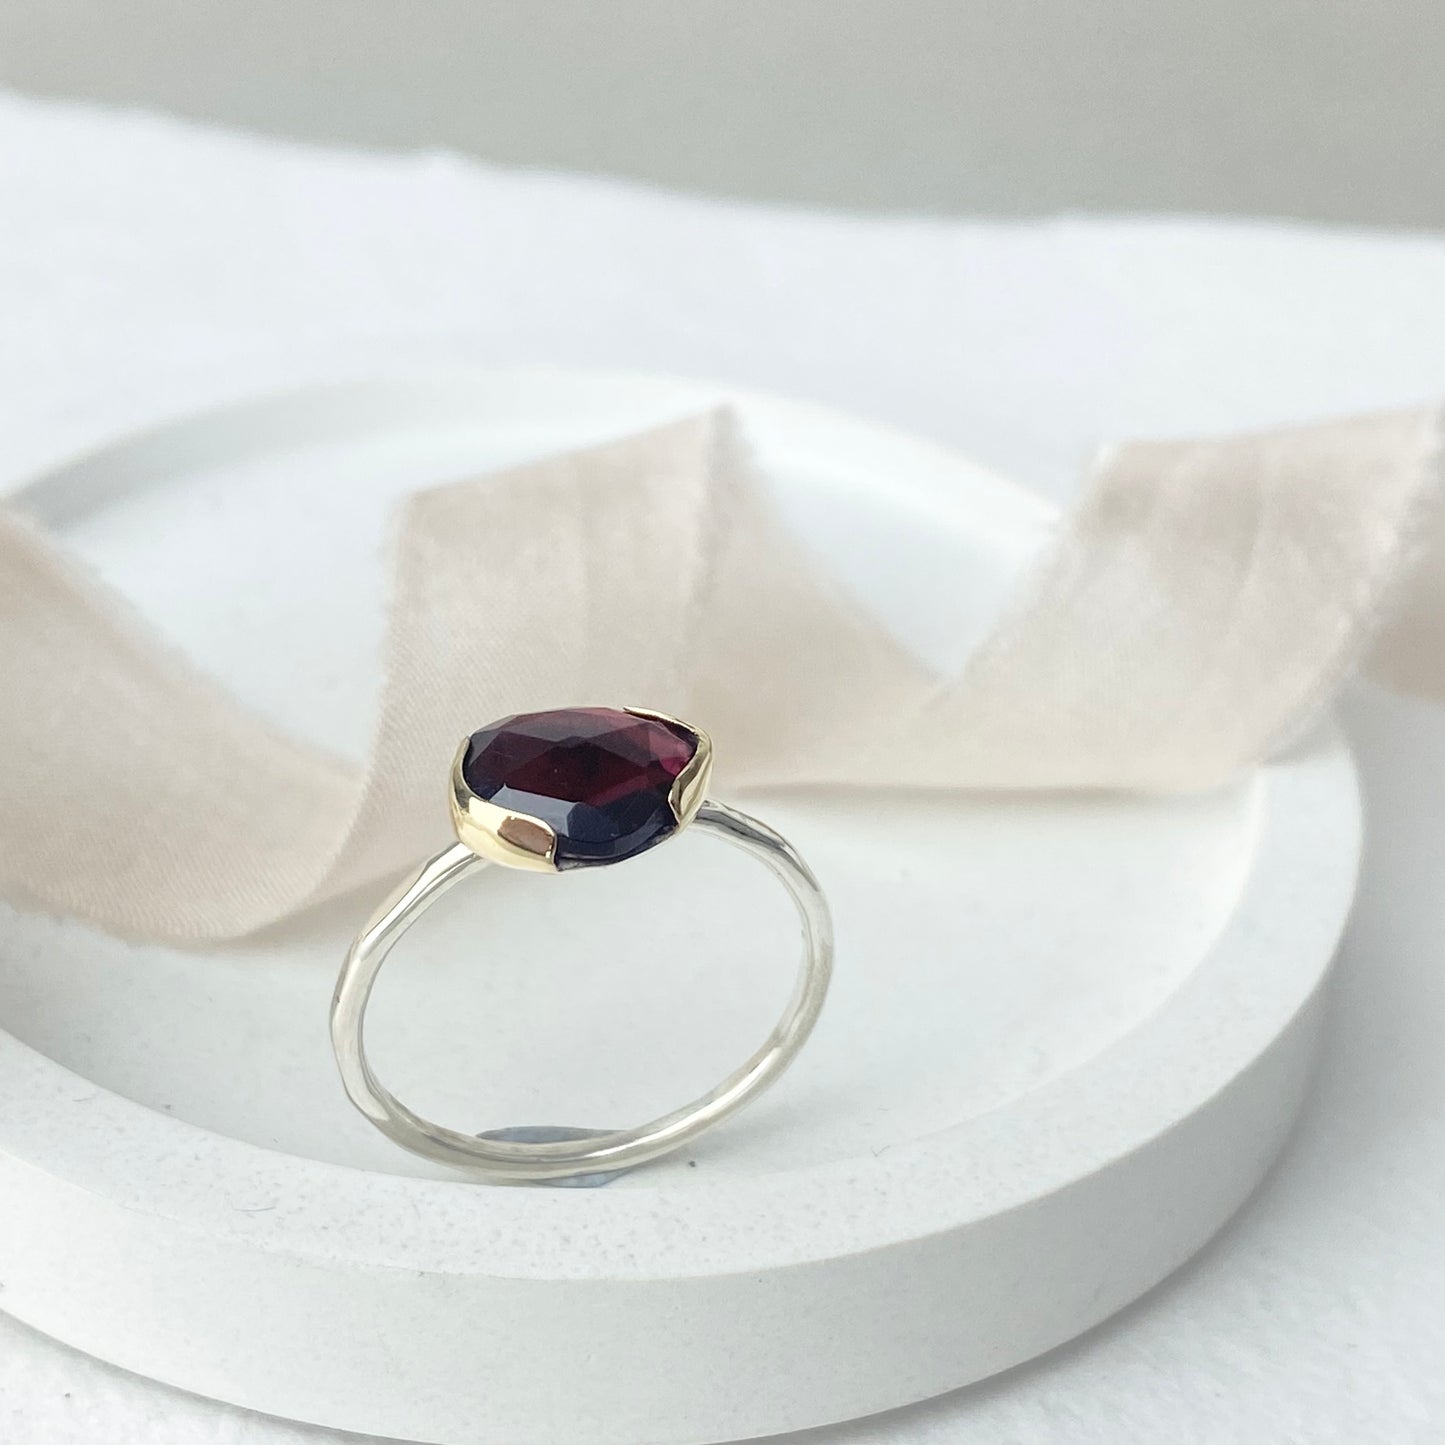 Garnet ring in silver and 9ct gold